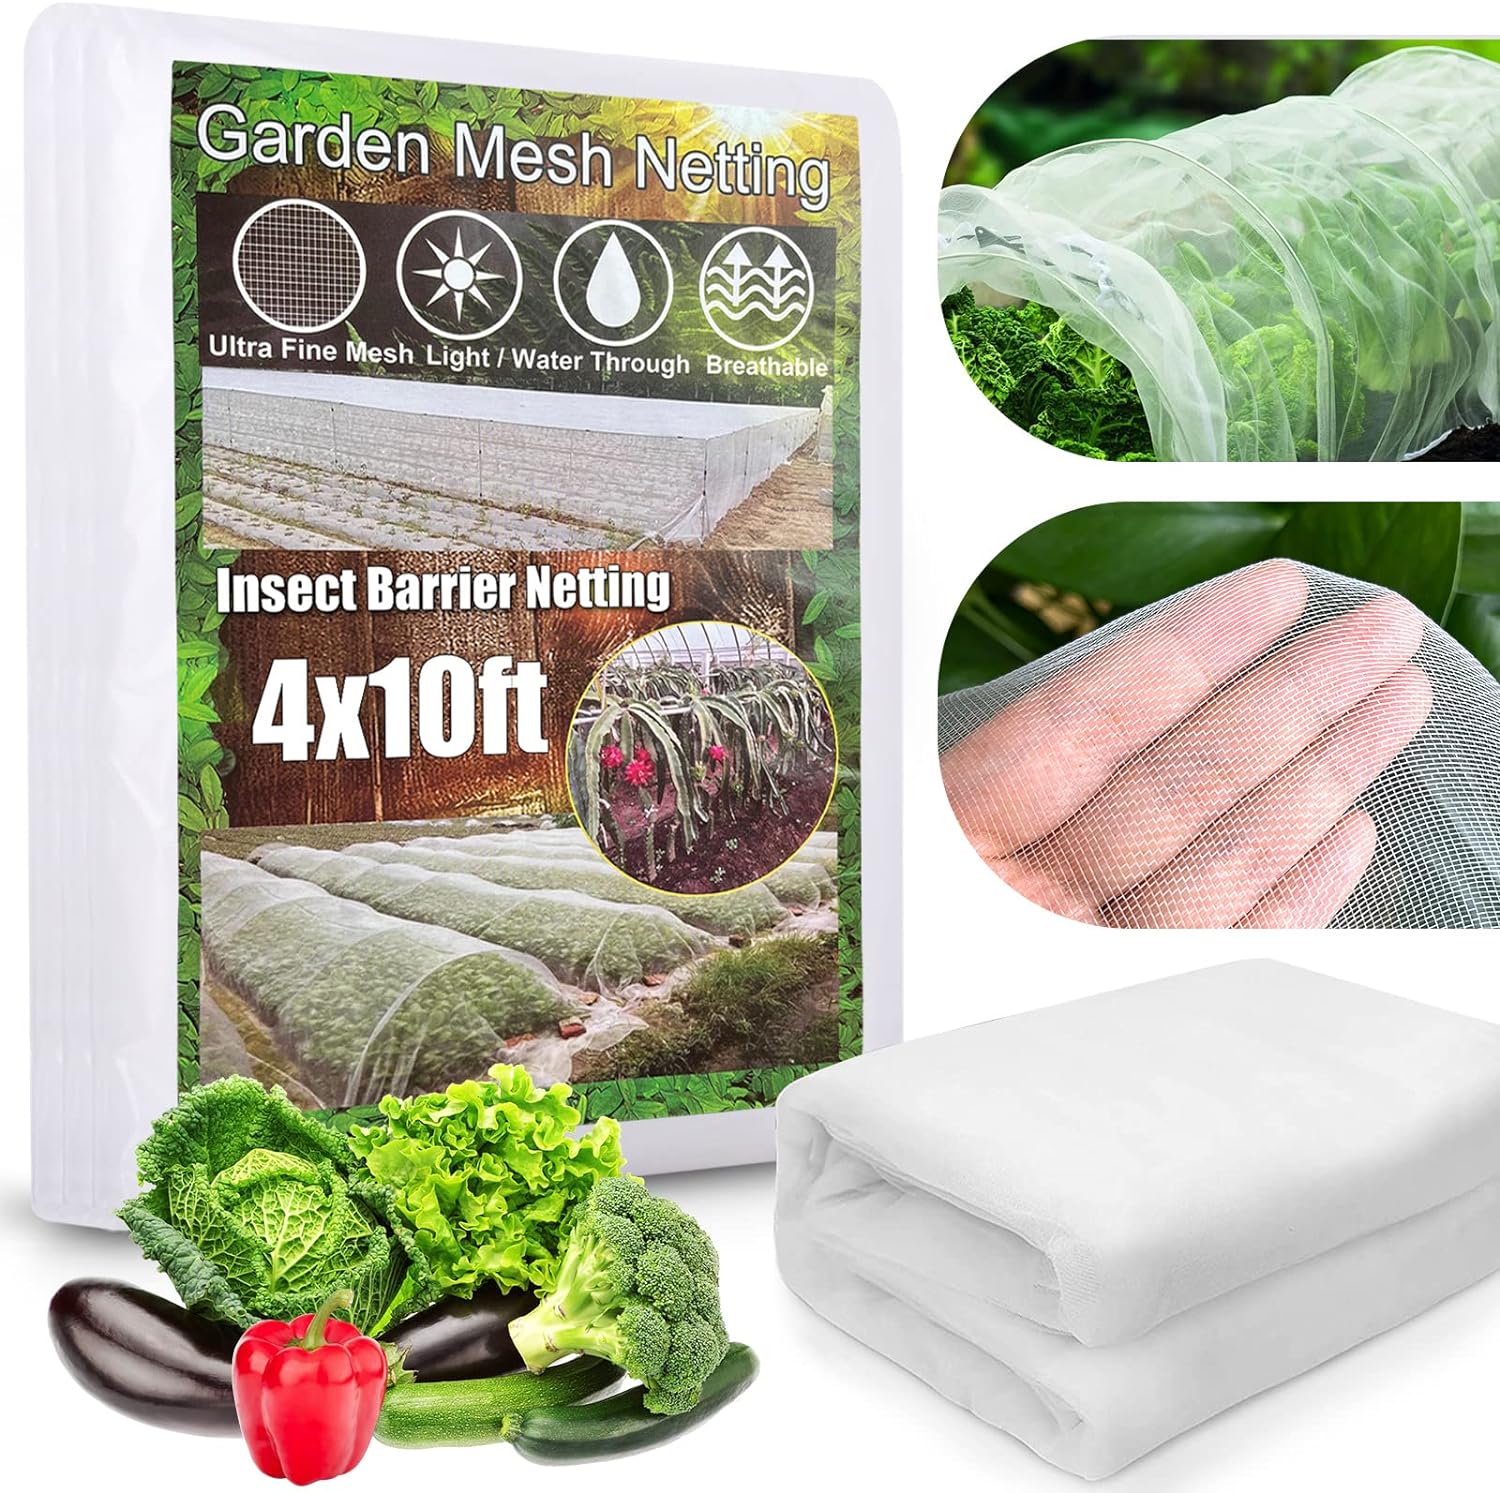 Garden Netting Pest Barrier Mosquito Netting Plant Cover 10x6.5FT Ultra Fine Garden Mesh Netting Protection Net, Vegetable Row Cover Shrubs Fruits Tree Flowers Crops Raised Bed Screen Insect Bug Mesh